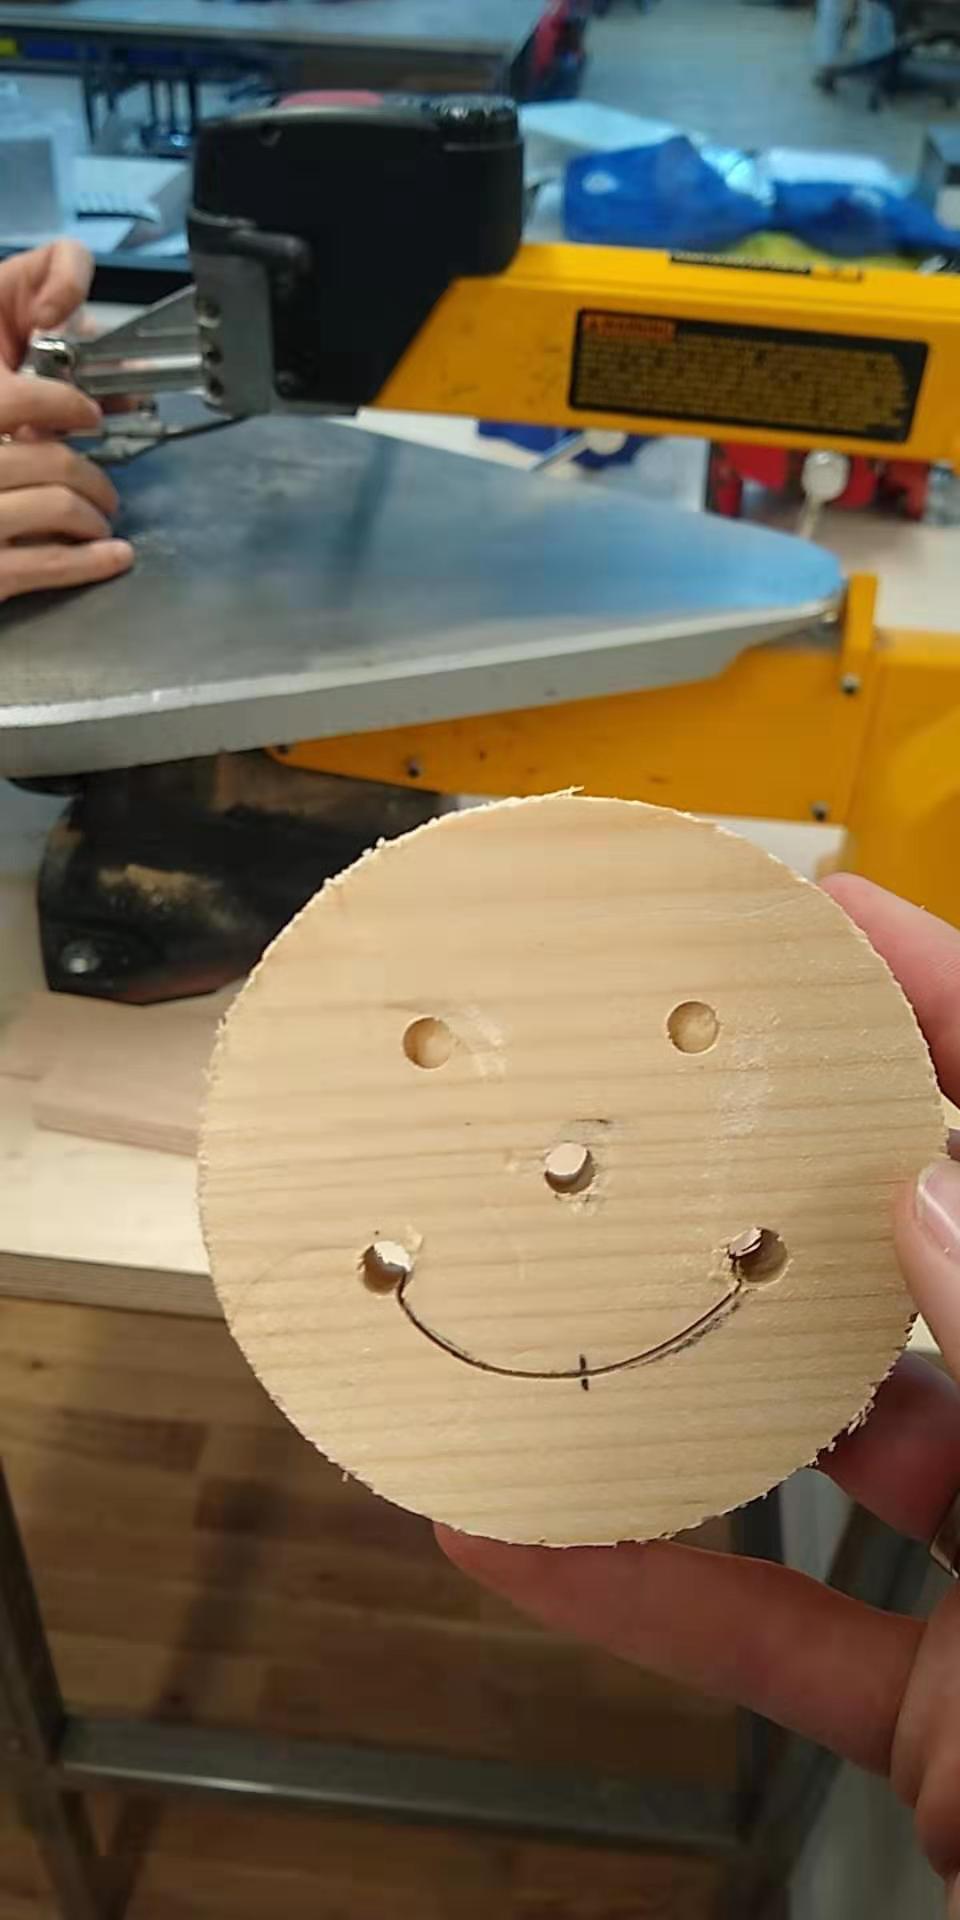 A smiley with a line sawed through for the mouth.